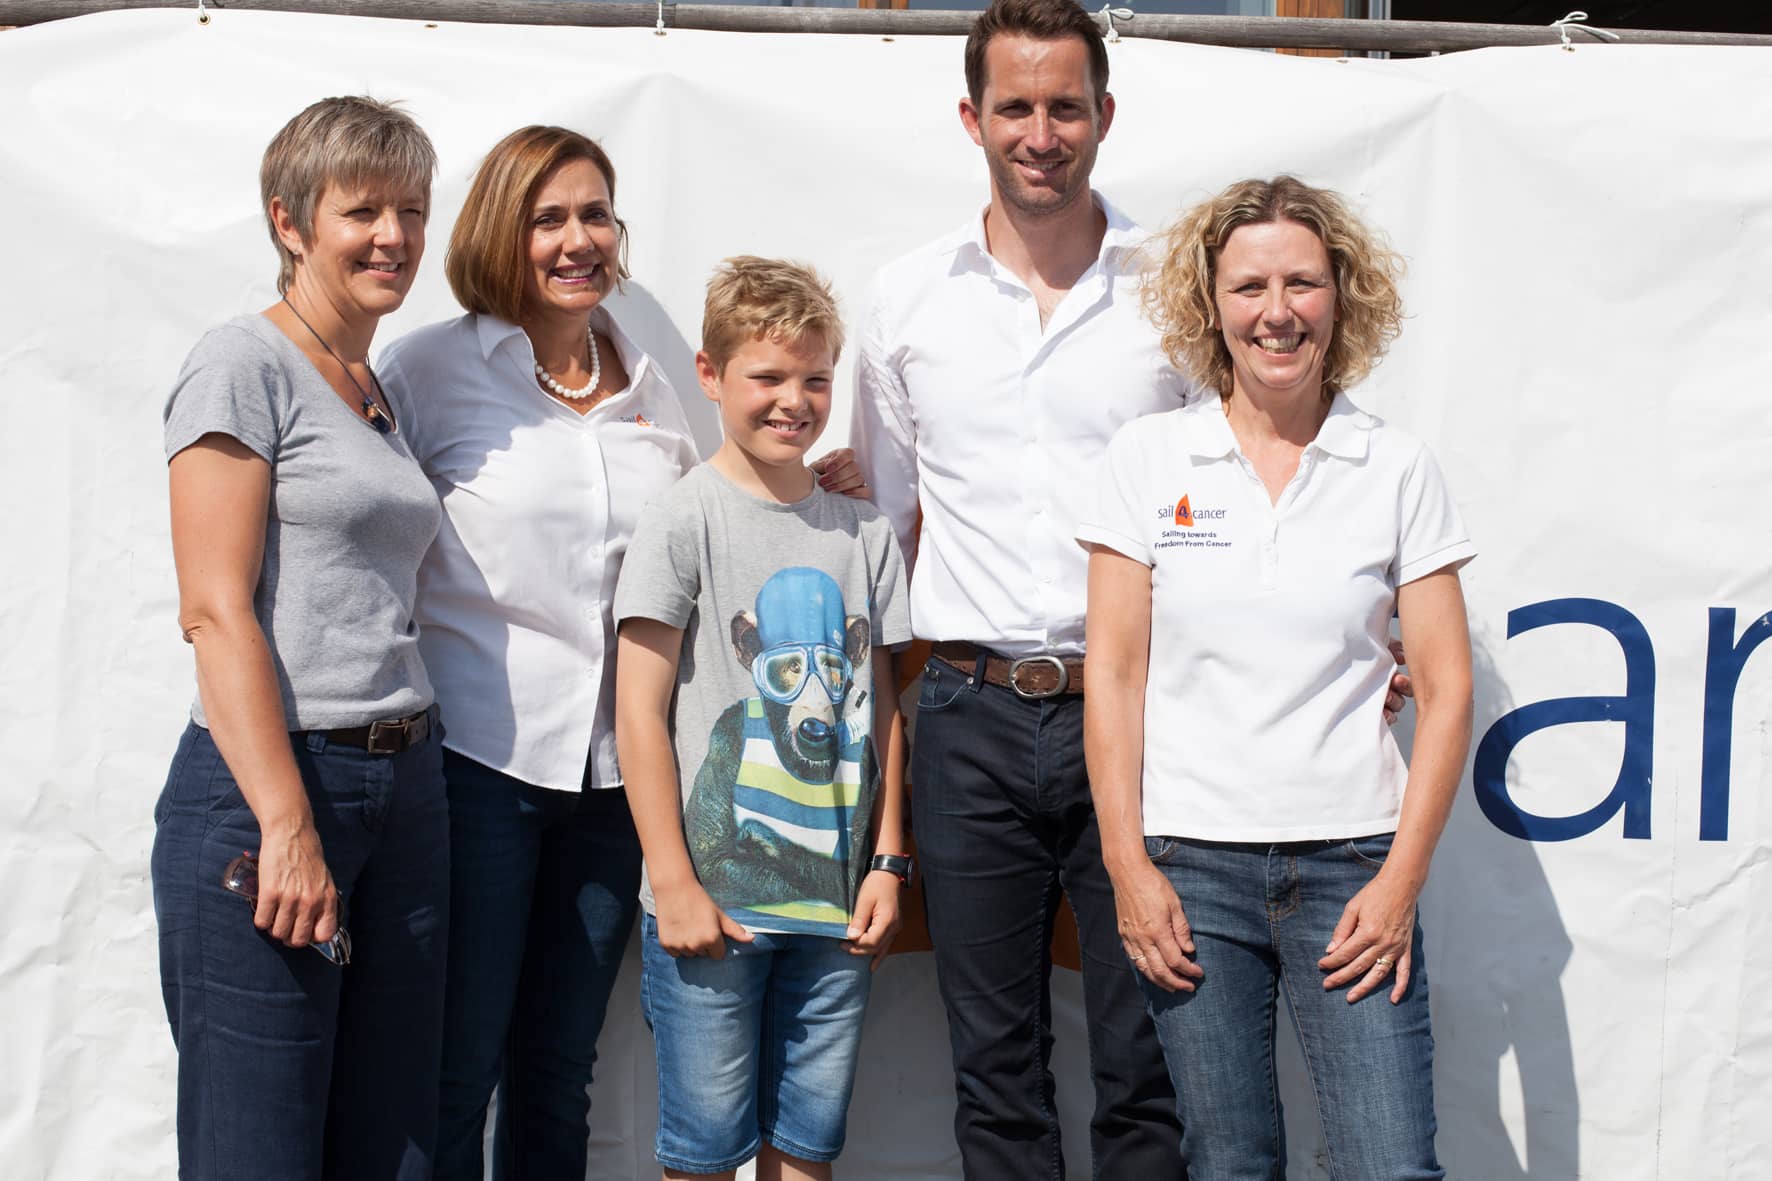 ail 4 Cancer’s Patron Sir Ben Ainslie enjoys a sailing day with a group of people helped by the charity